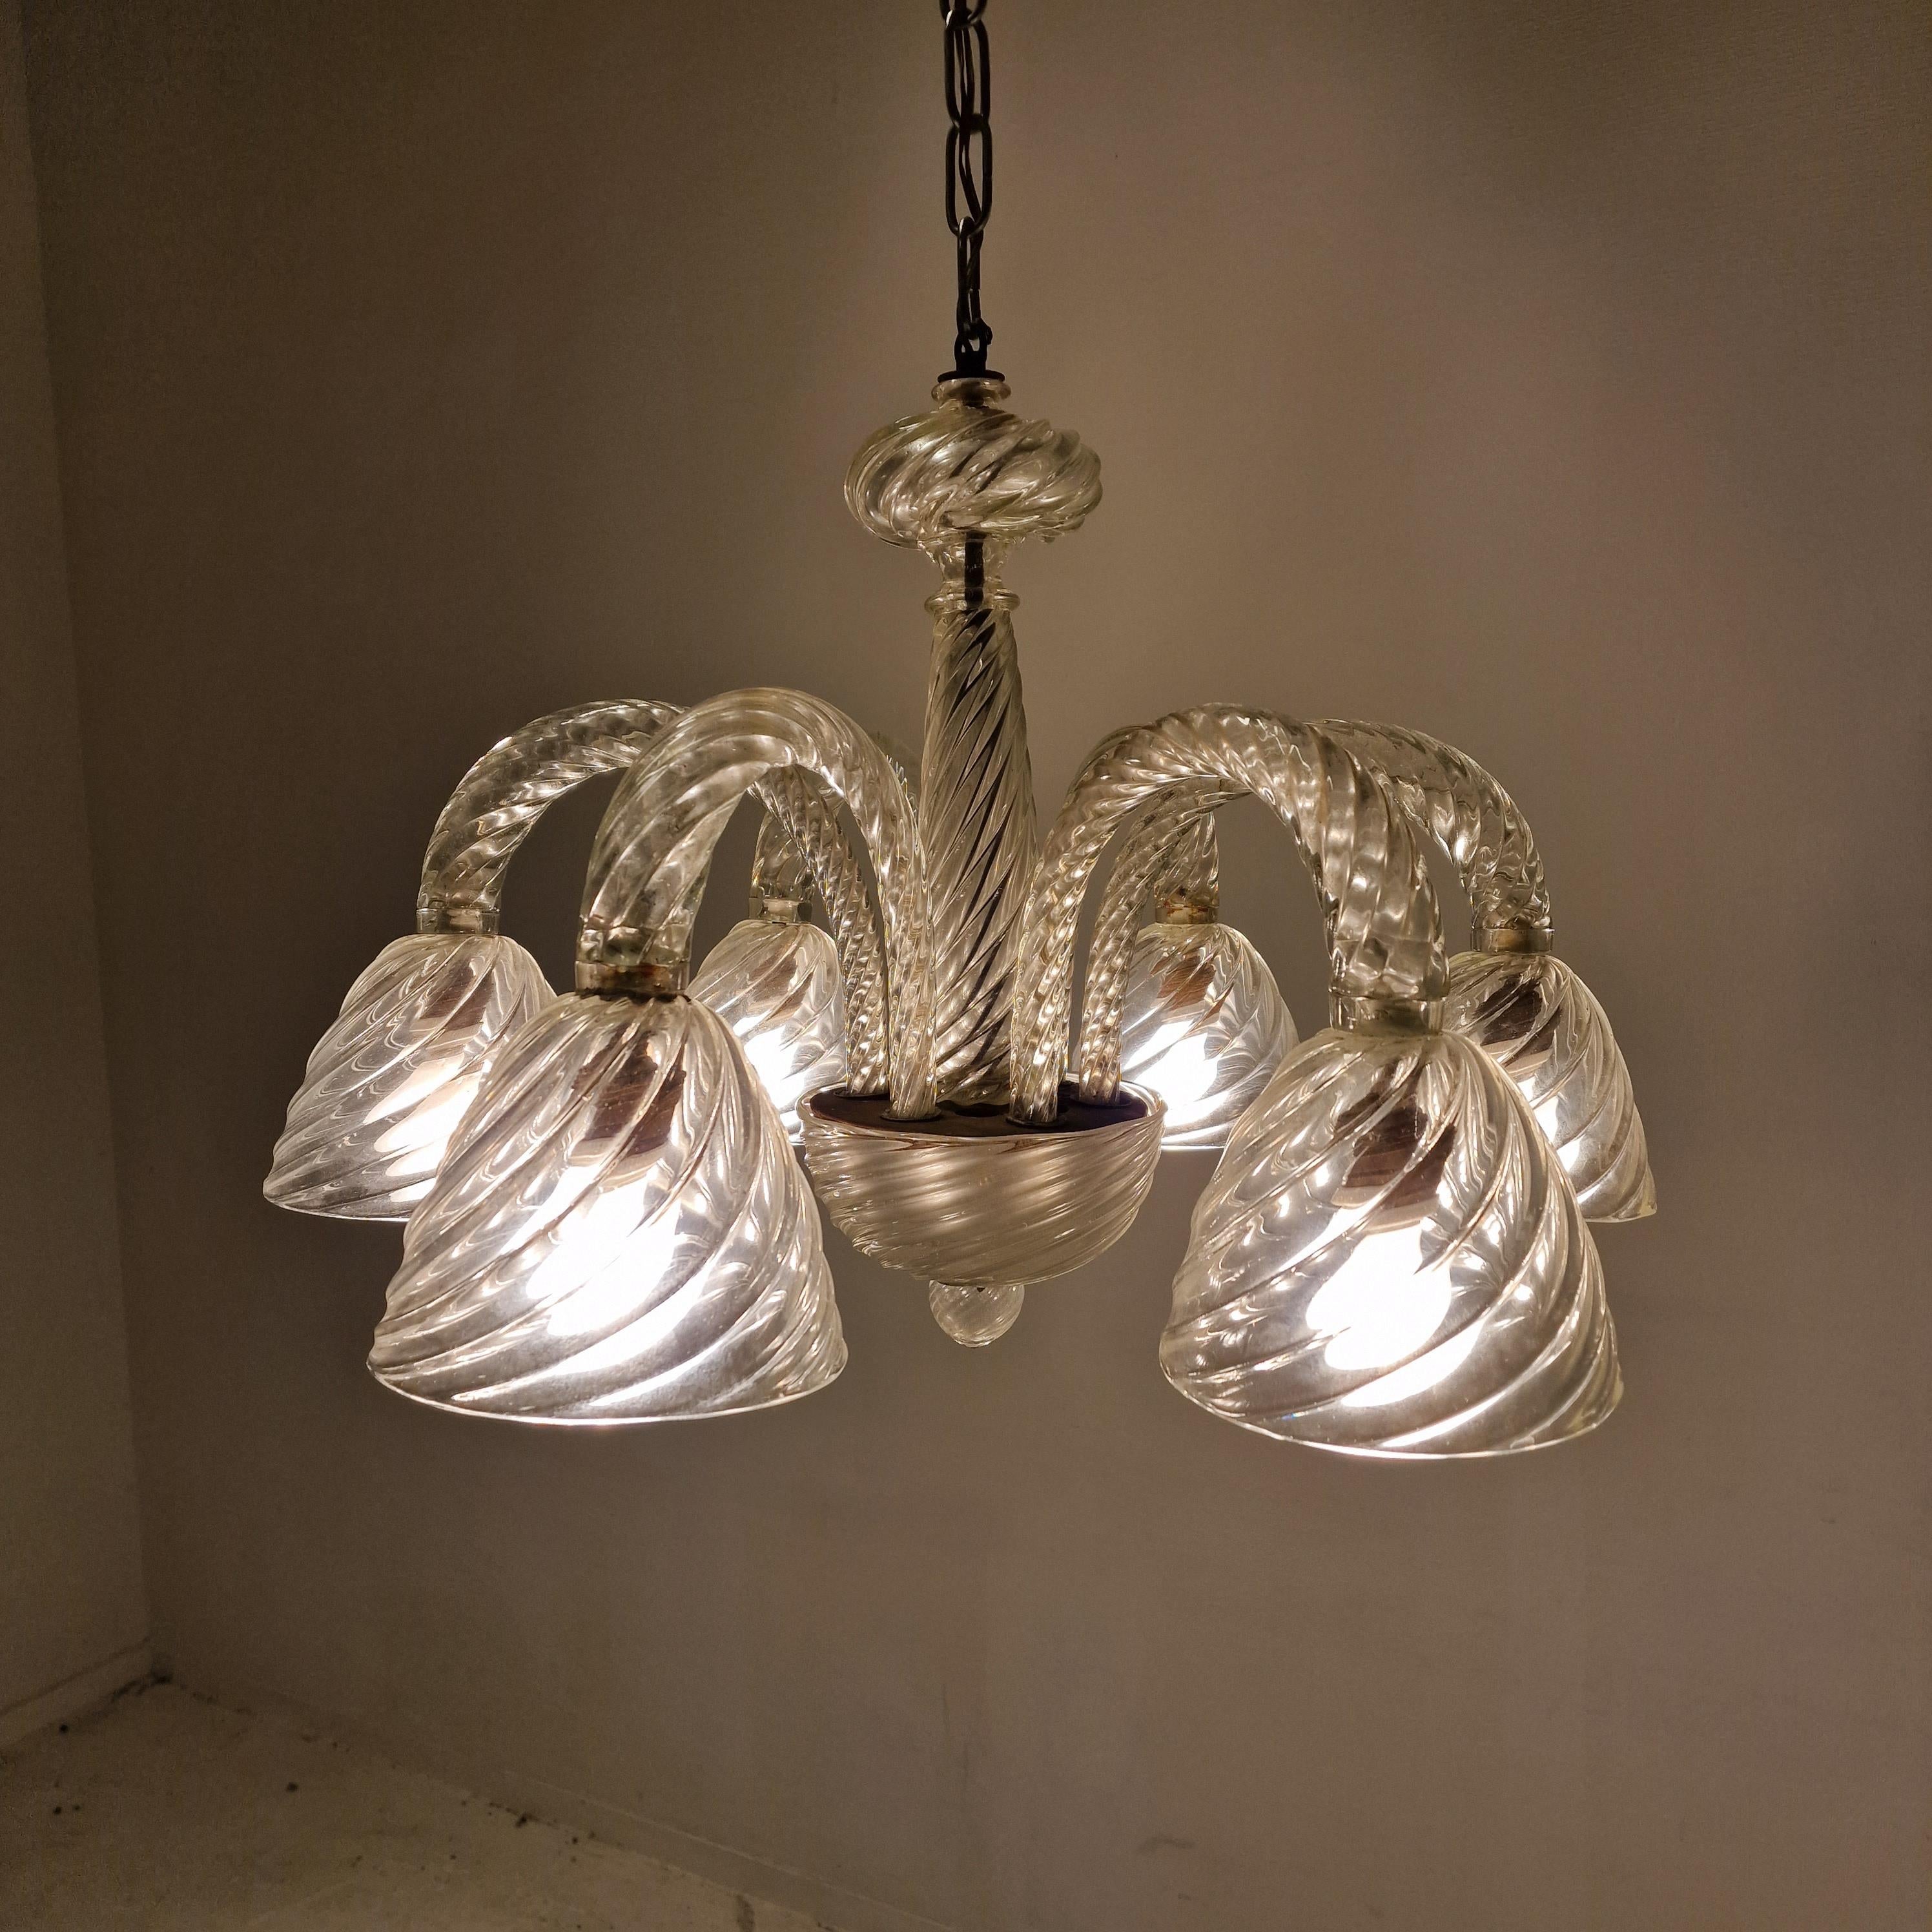 Mid-Century Modern Barovier & Toso Murano Glass Chandelier, Italy 1950's For Sale